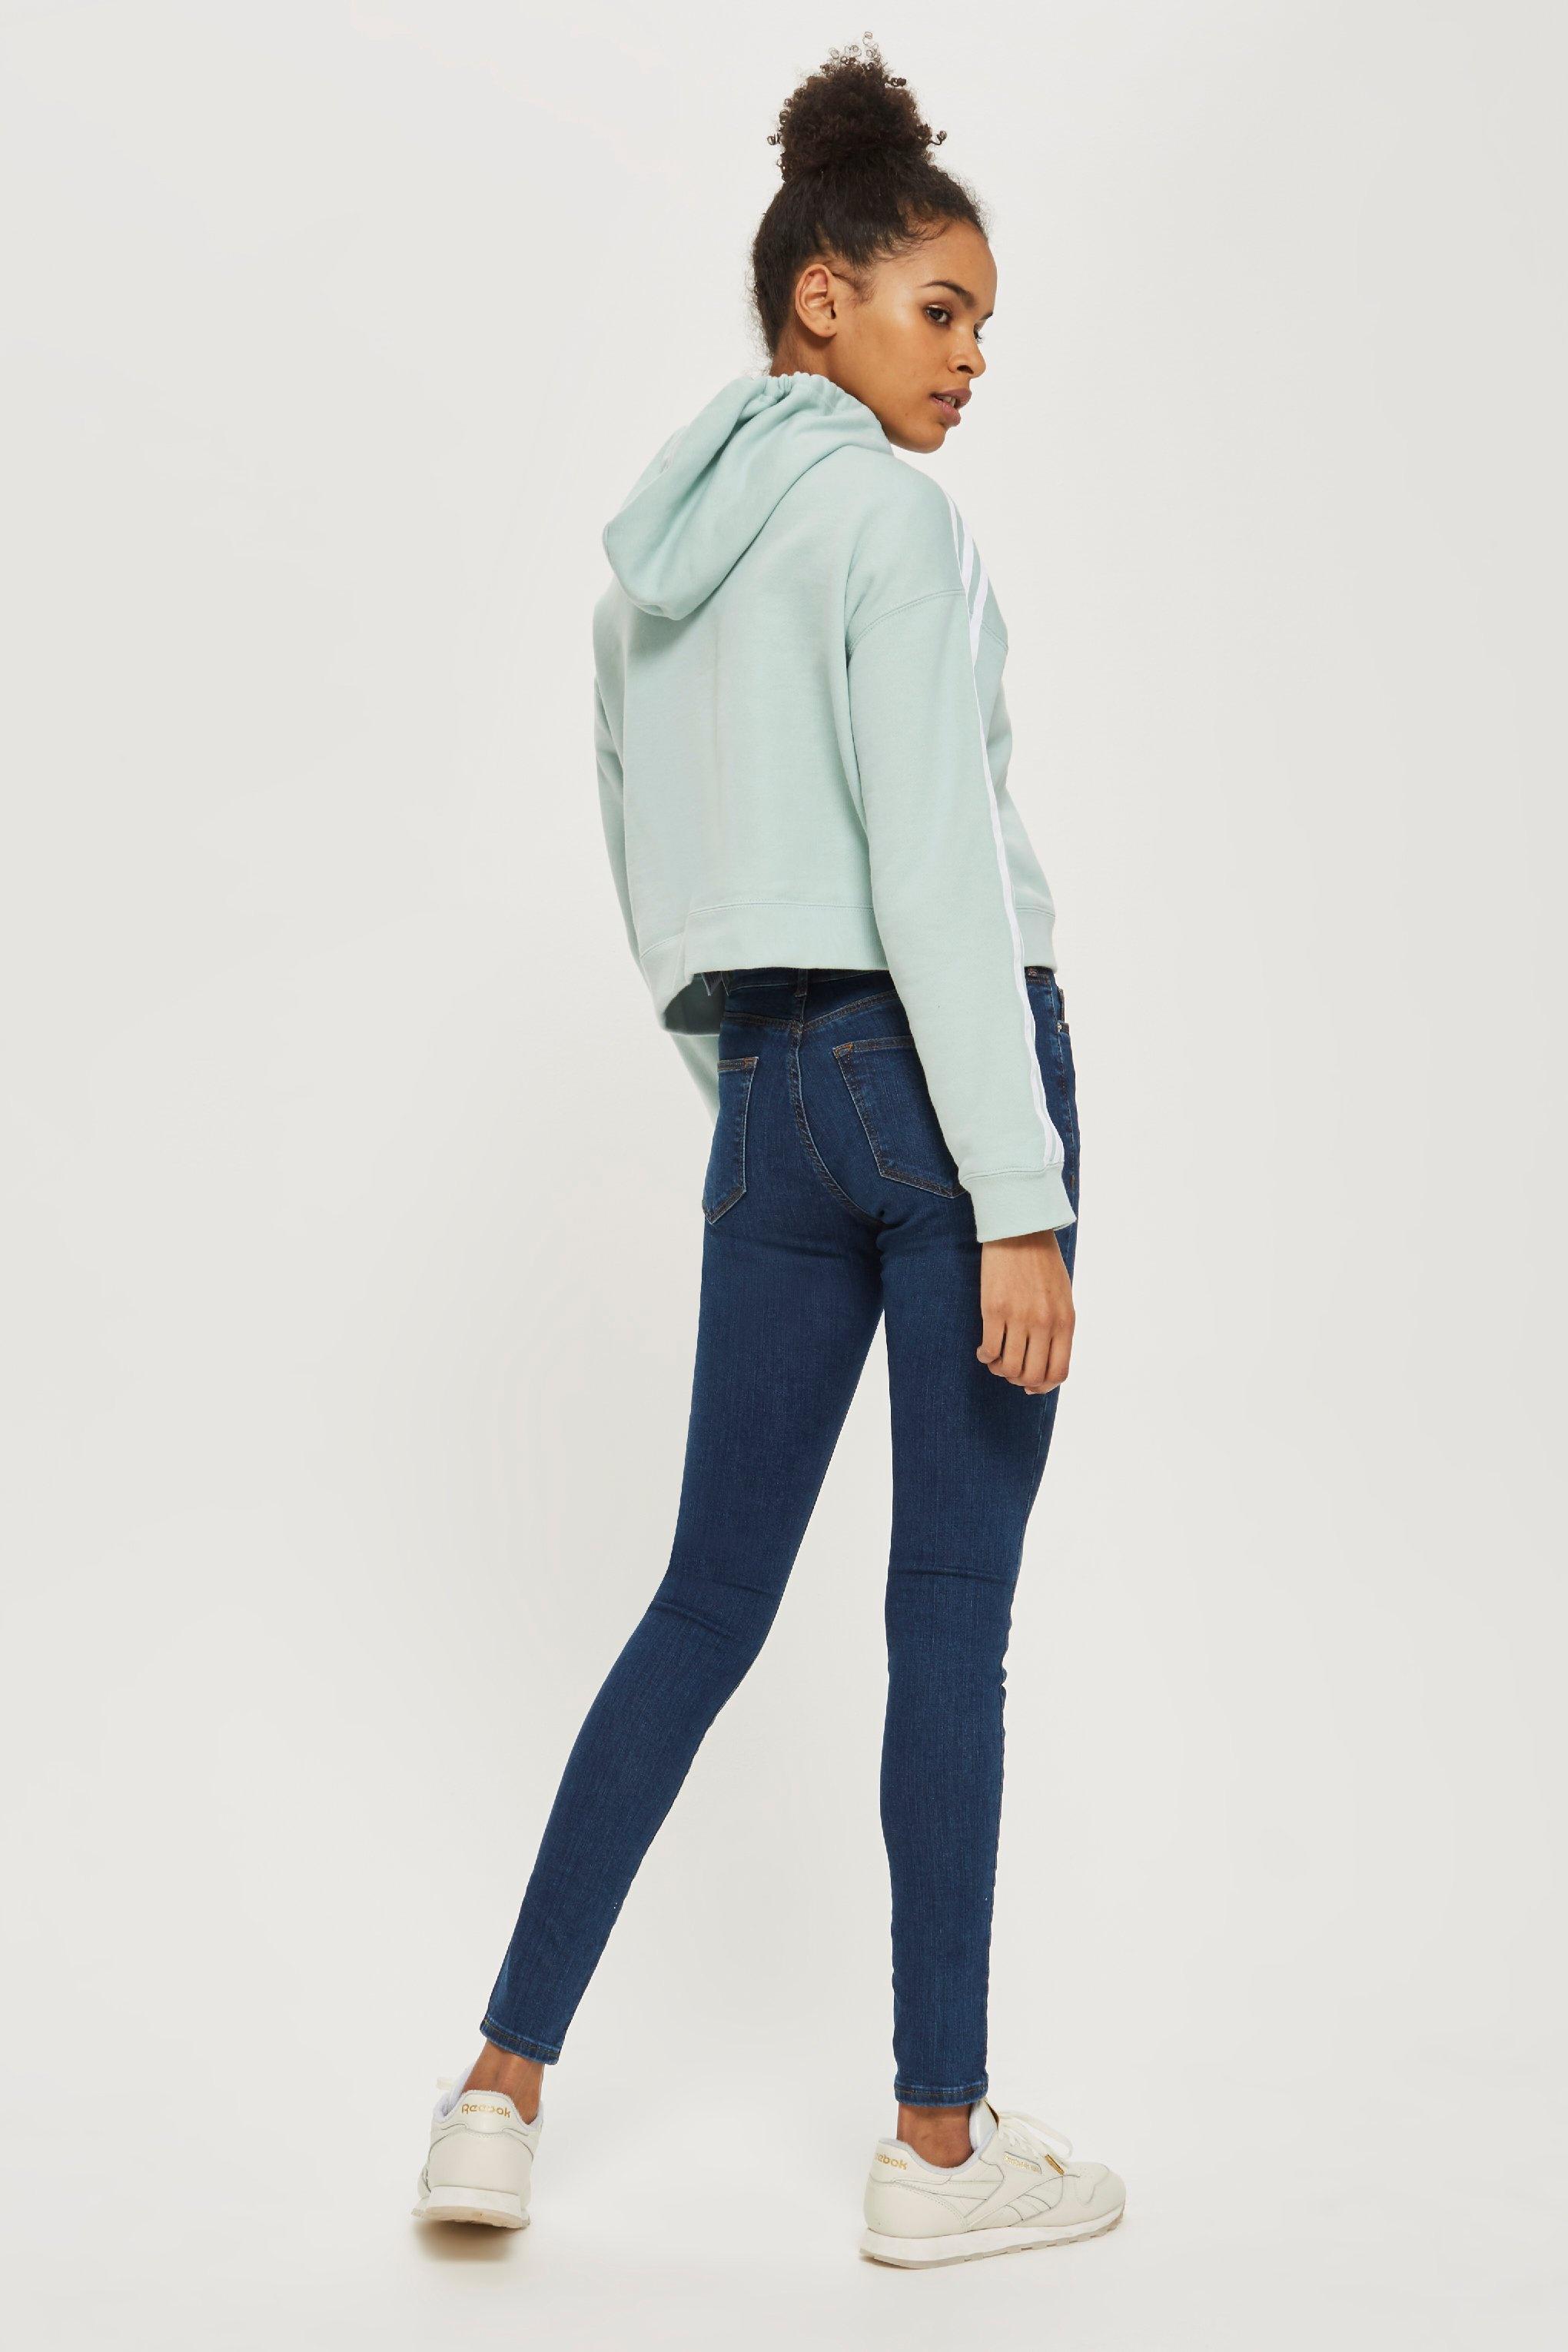 sidney jeans topshop review